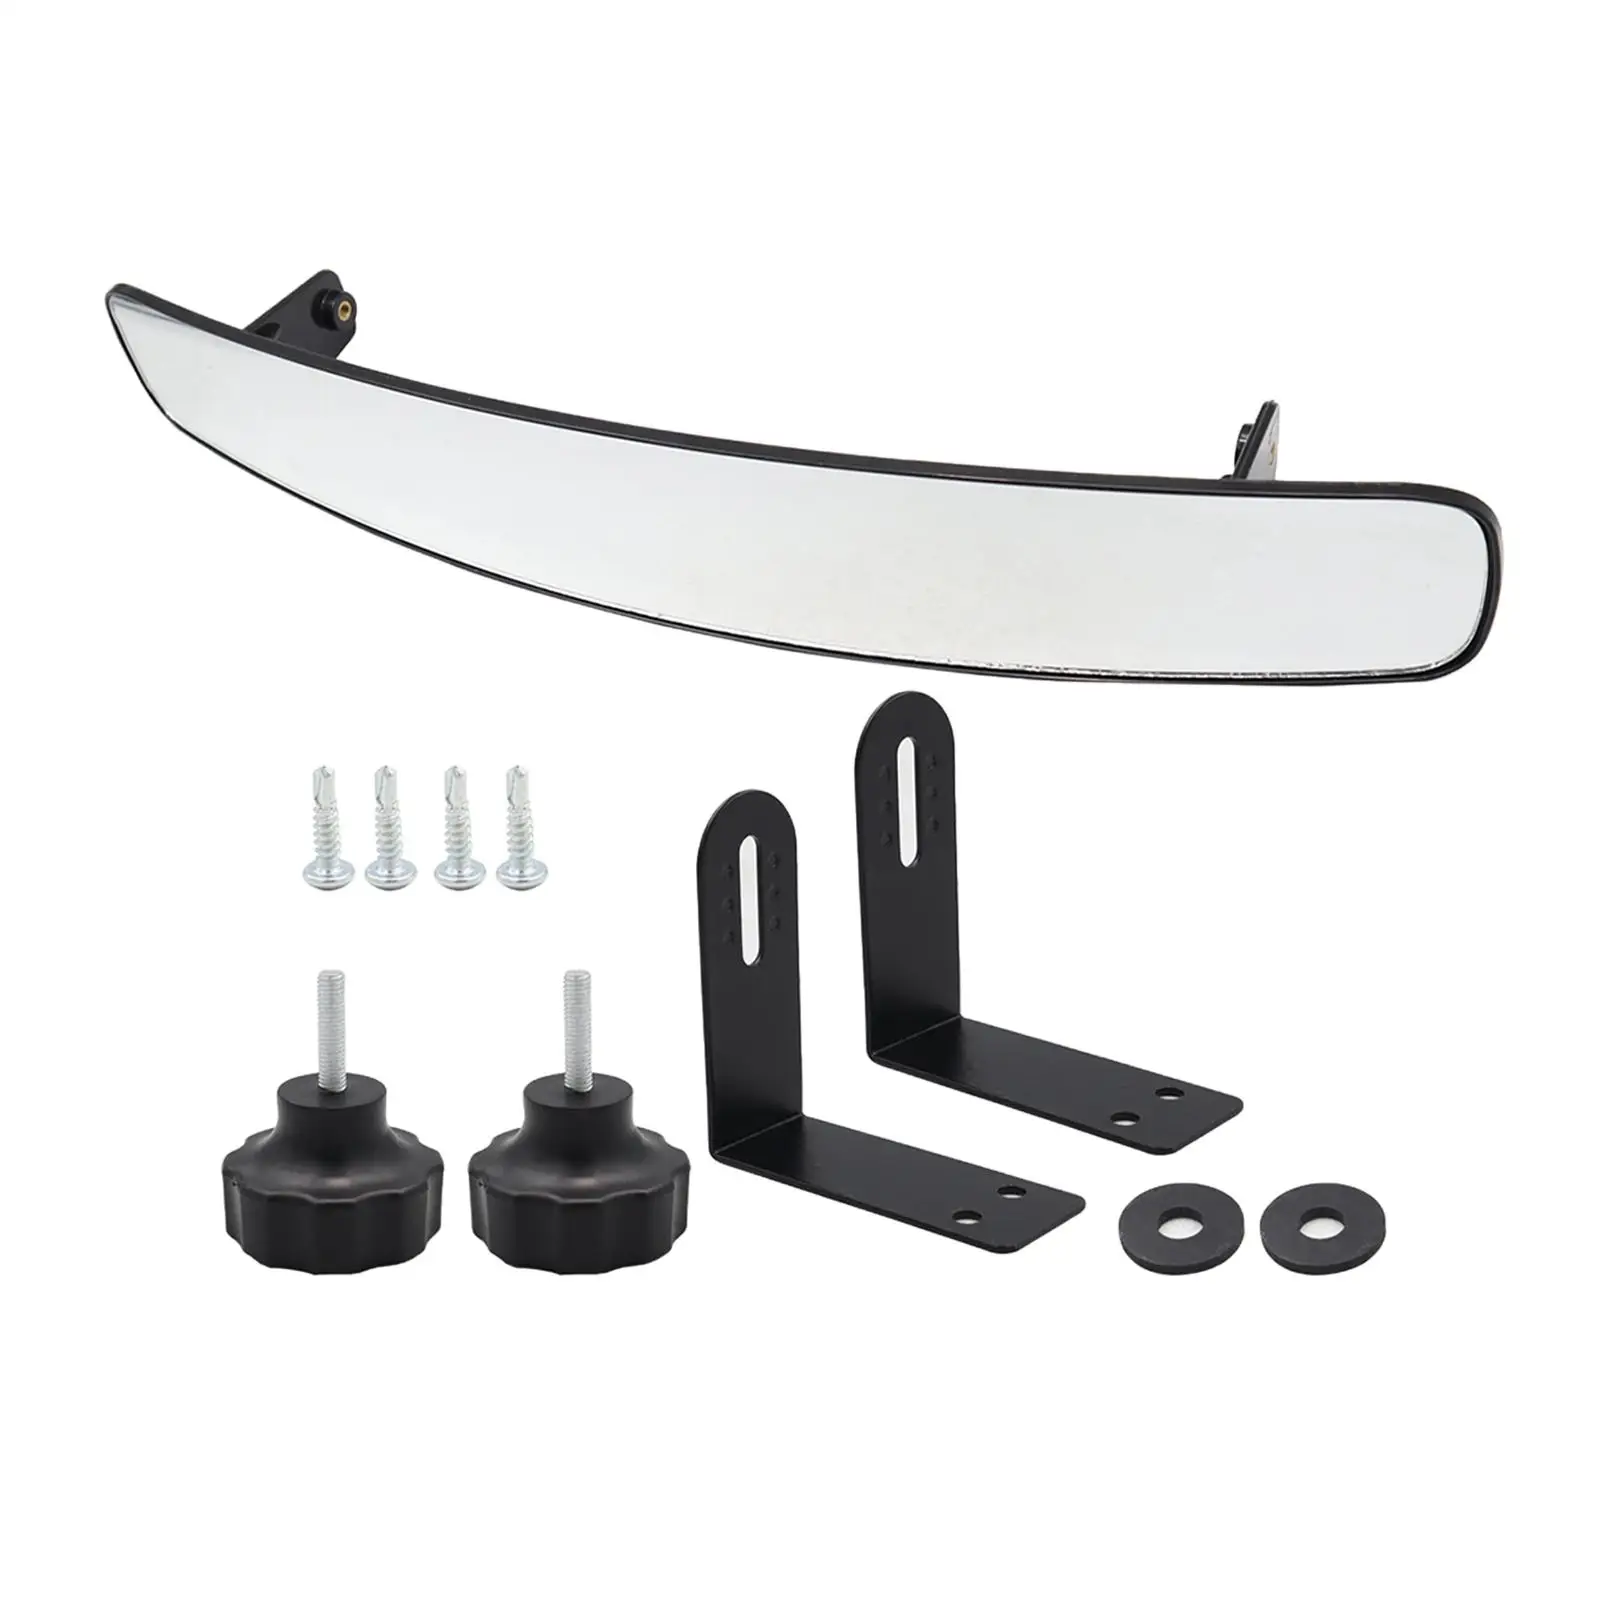 Black Golf Cart Rear View Mirror Accessory Spare Parts Clear Image Replaces 180 Degree Panoramic Rear View Mirror for Ezgo